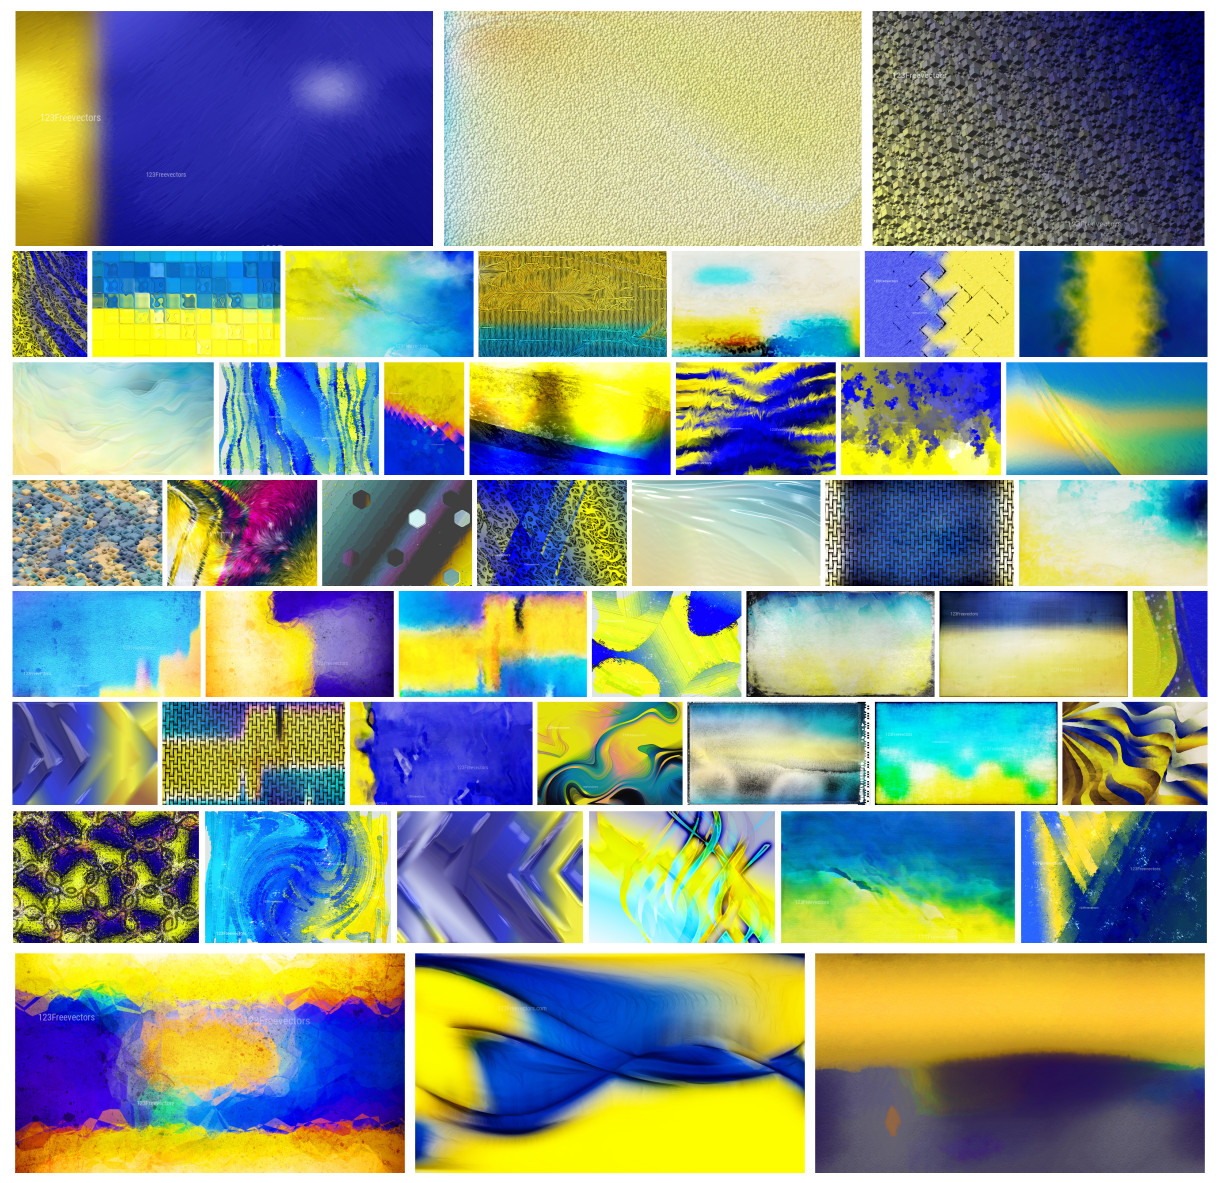 Vibrant Harmony: A Collection of Blue and Yellow Design Inspiration